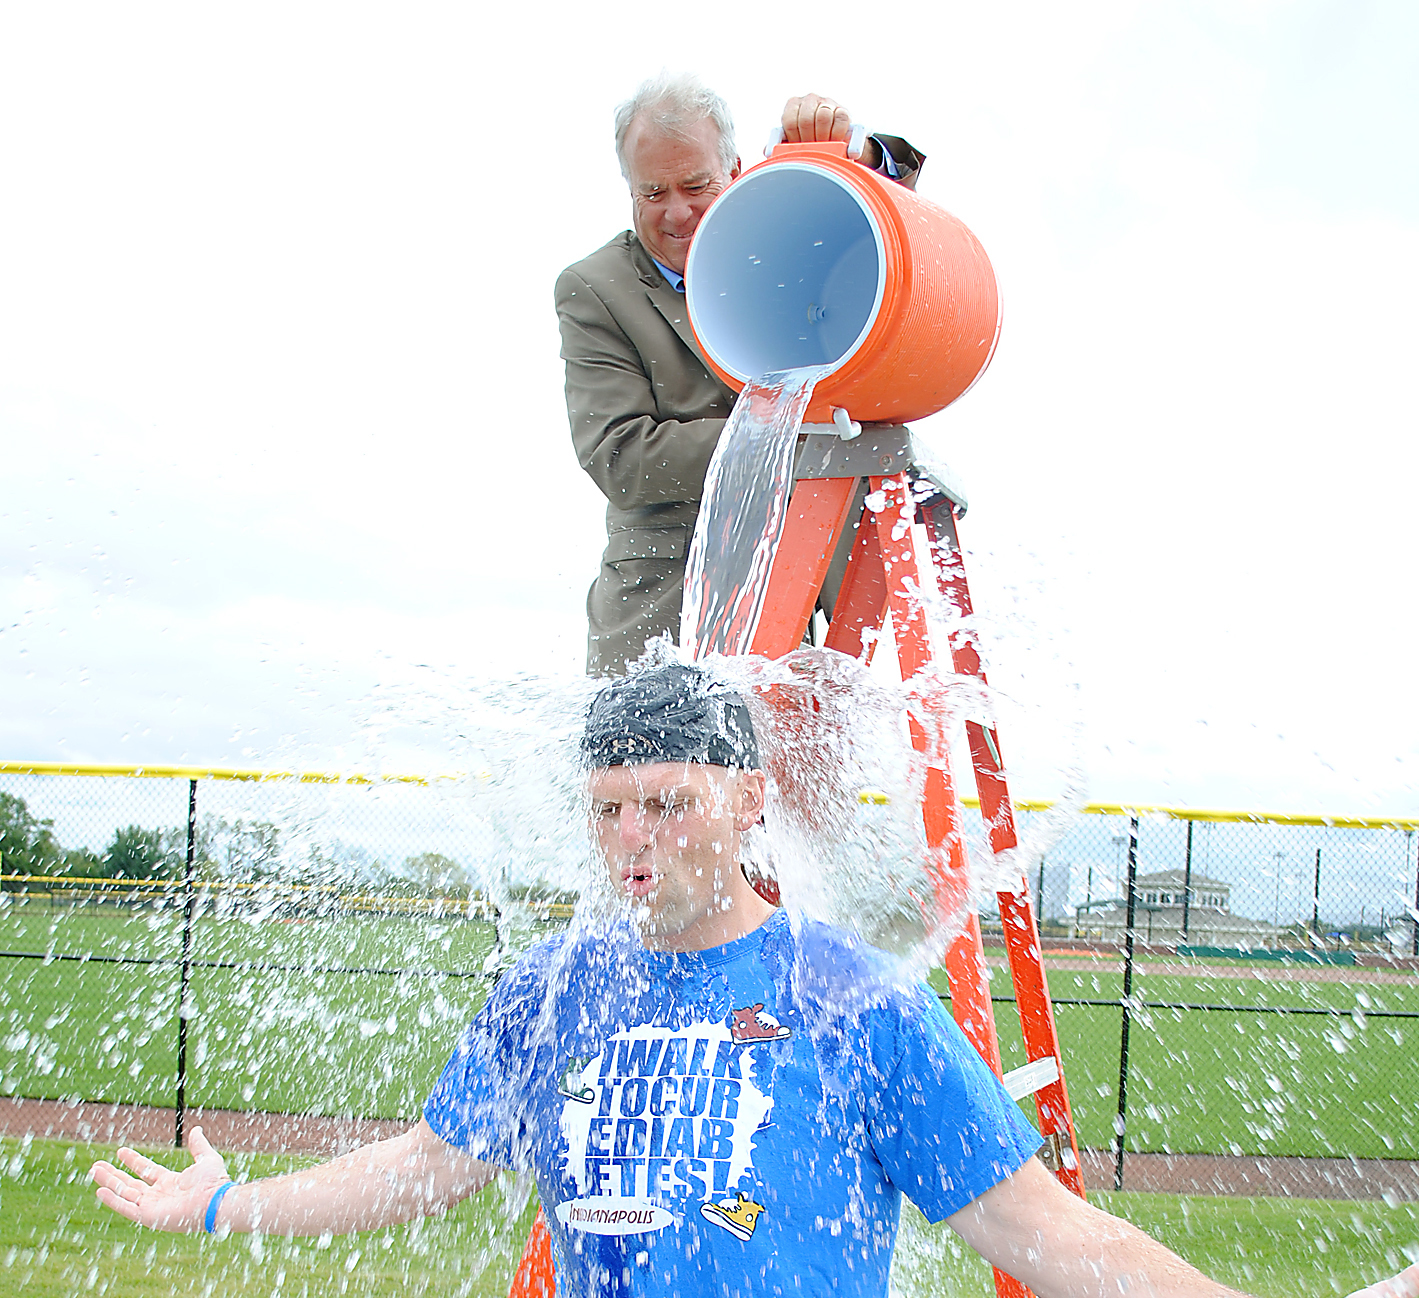 Mayor Andy Cook dumps a cooler of ice water on deputy mayor Todd Burtron at Grand Park Sports Campus on Sept. 12. (Photo by Robert Herrington)